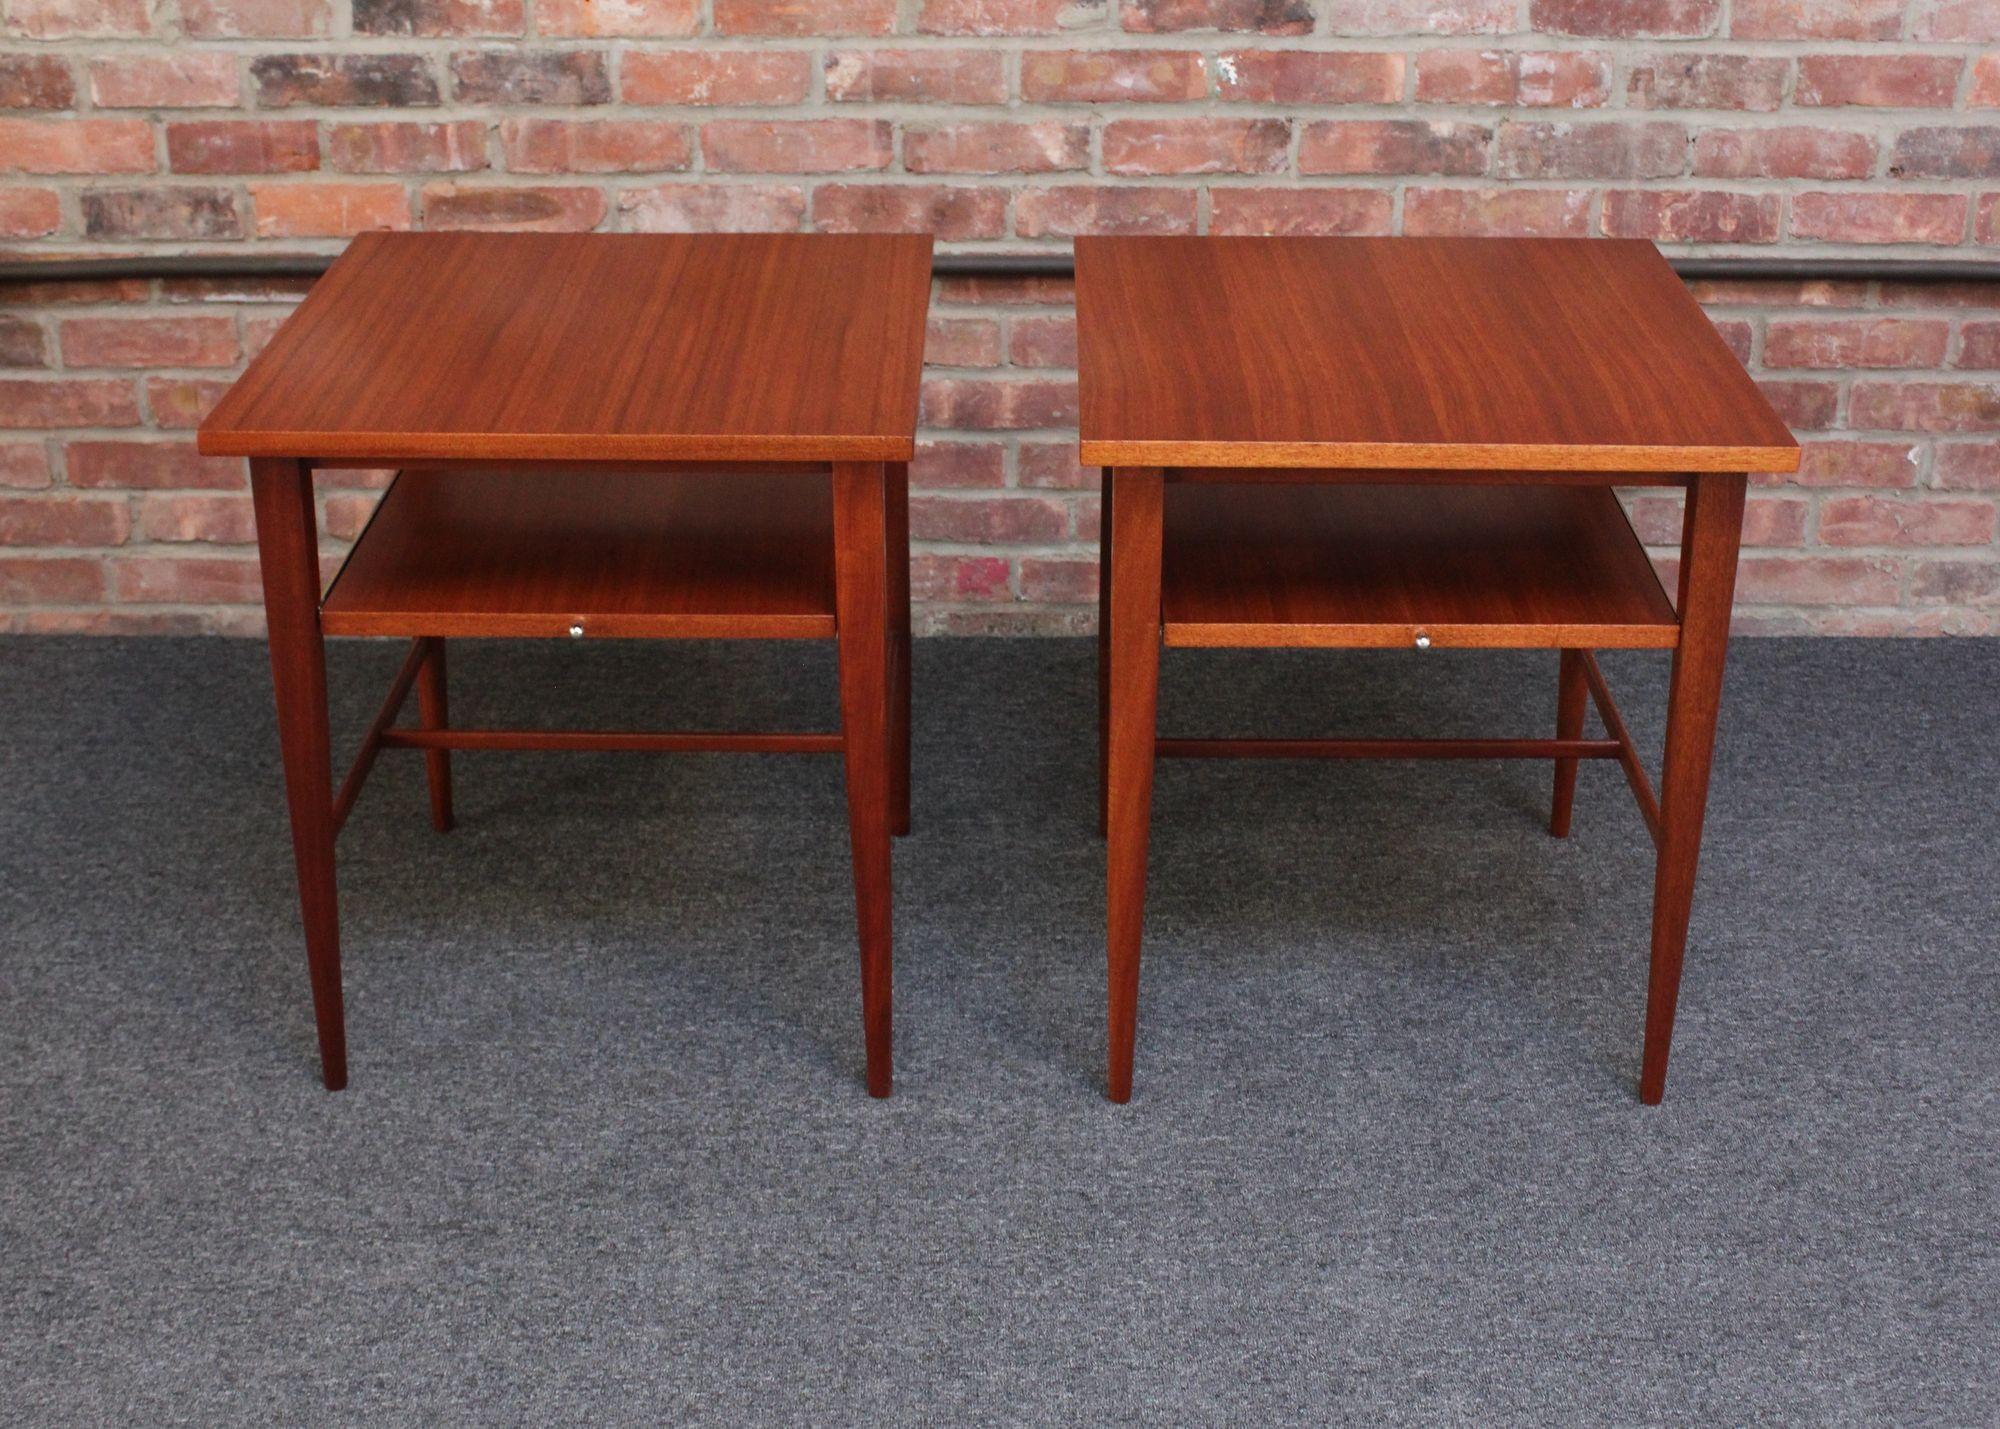 Stained Pair of Paul Mccobb Calvin Group Mahogany and Brass Nightstands for Directional For Sale